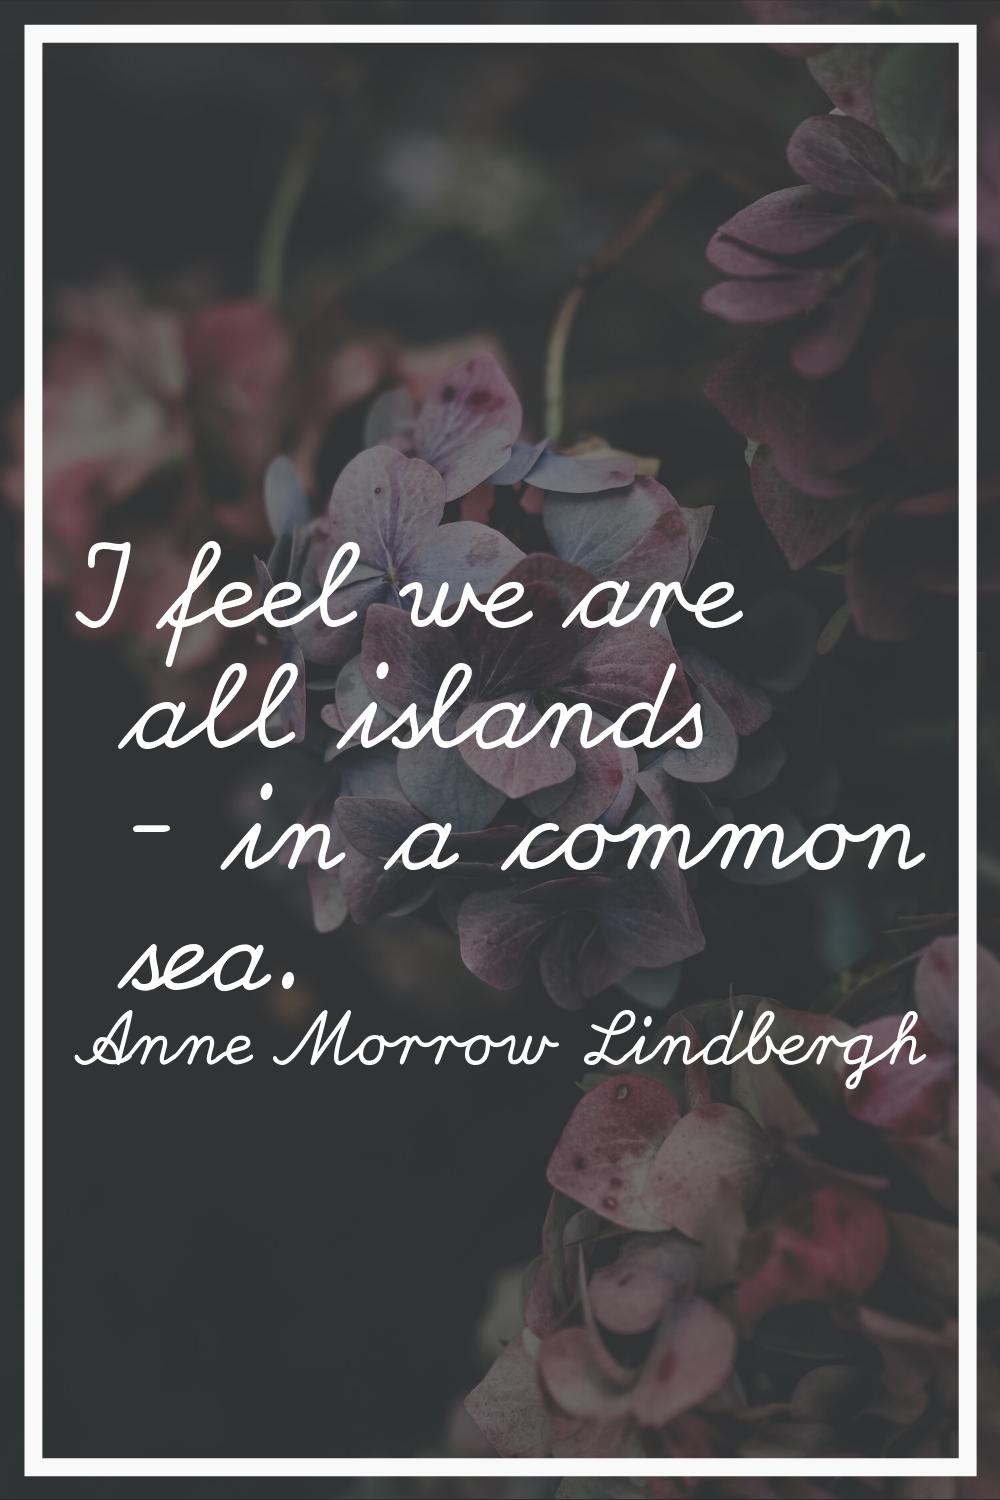 I feel we are all islands - in a common sea.